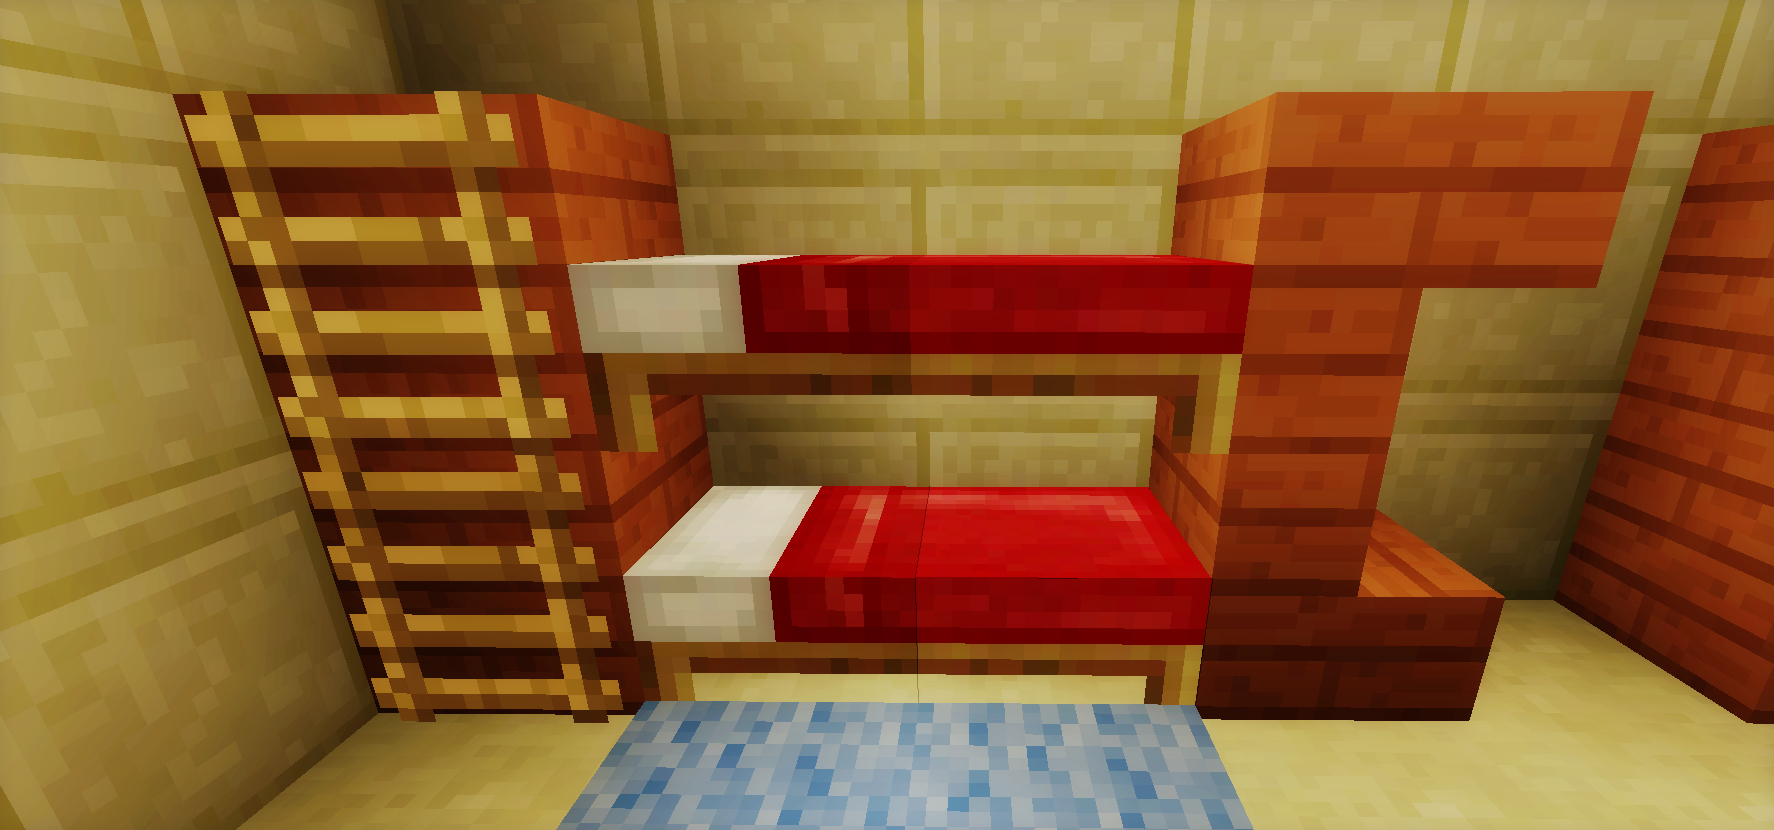 Minecraft Bedroom Furniture Tanisha S Craft,Best Color Paint For Small Bedroom